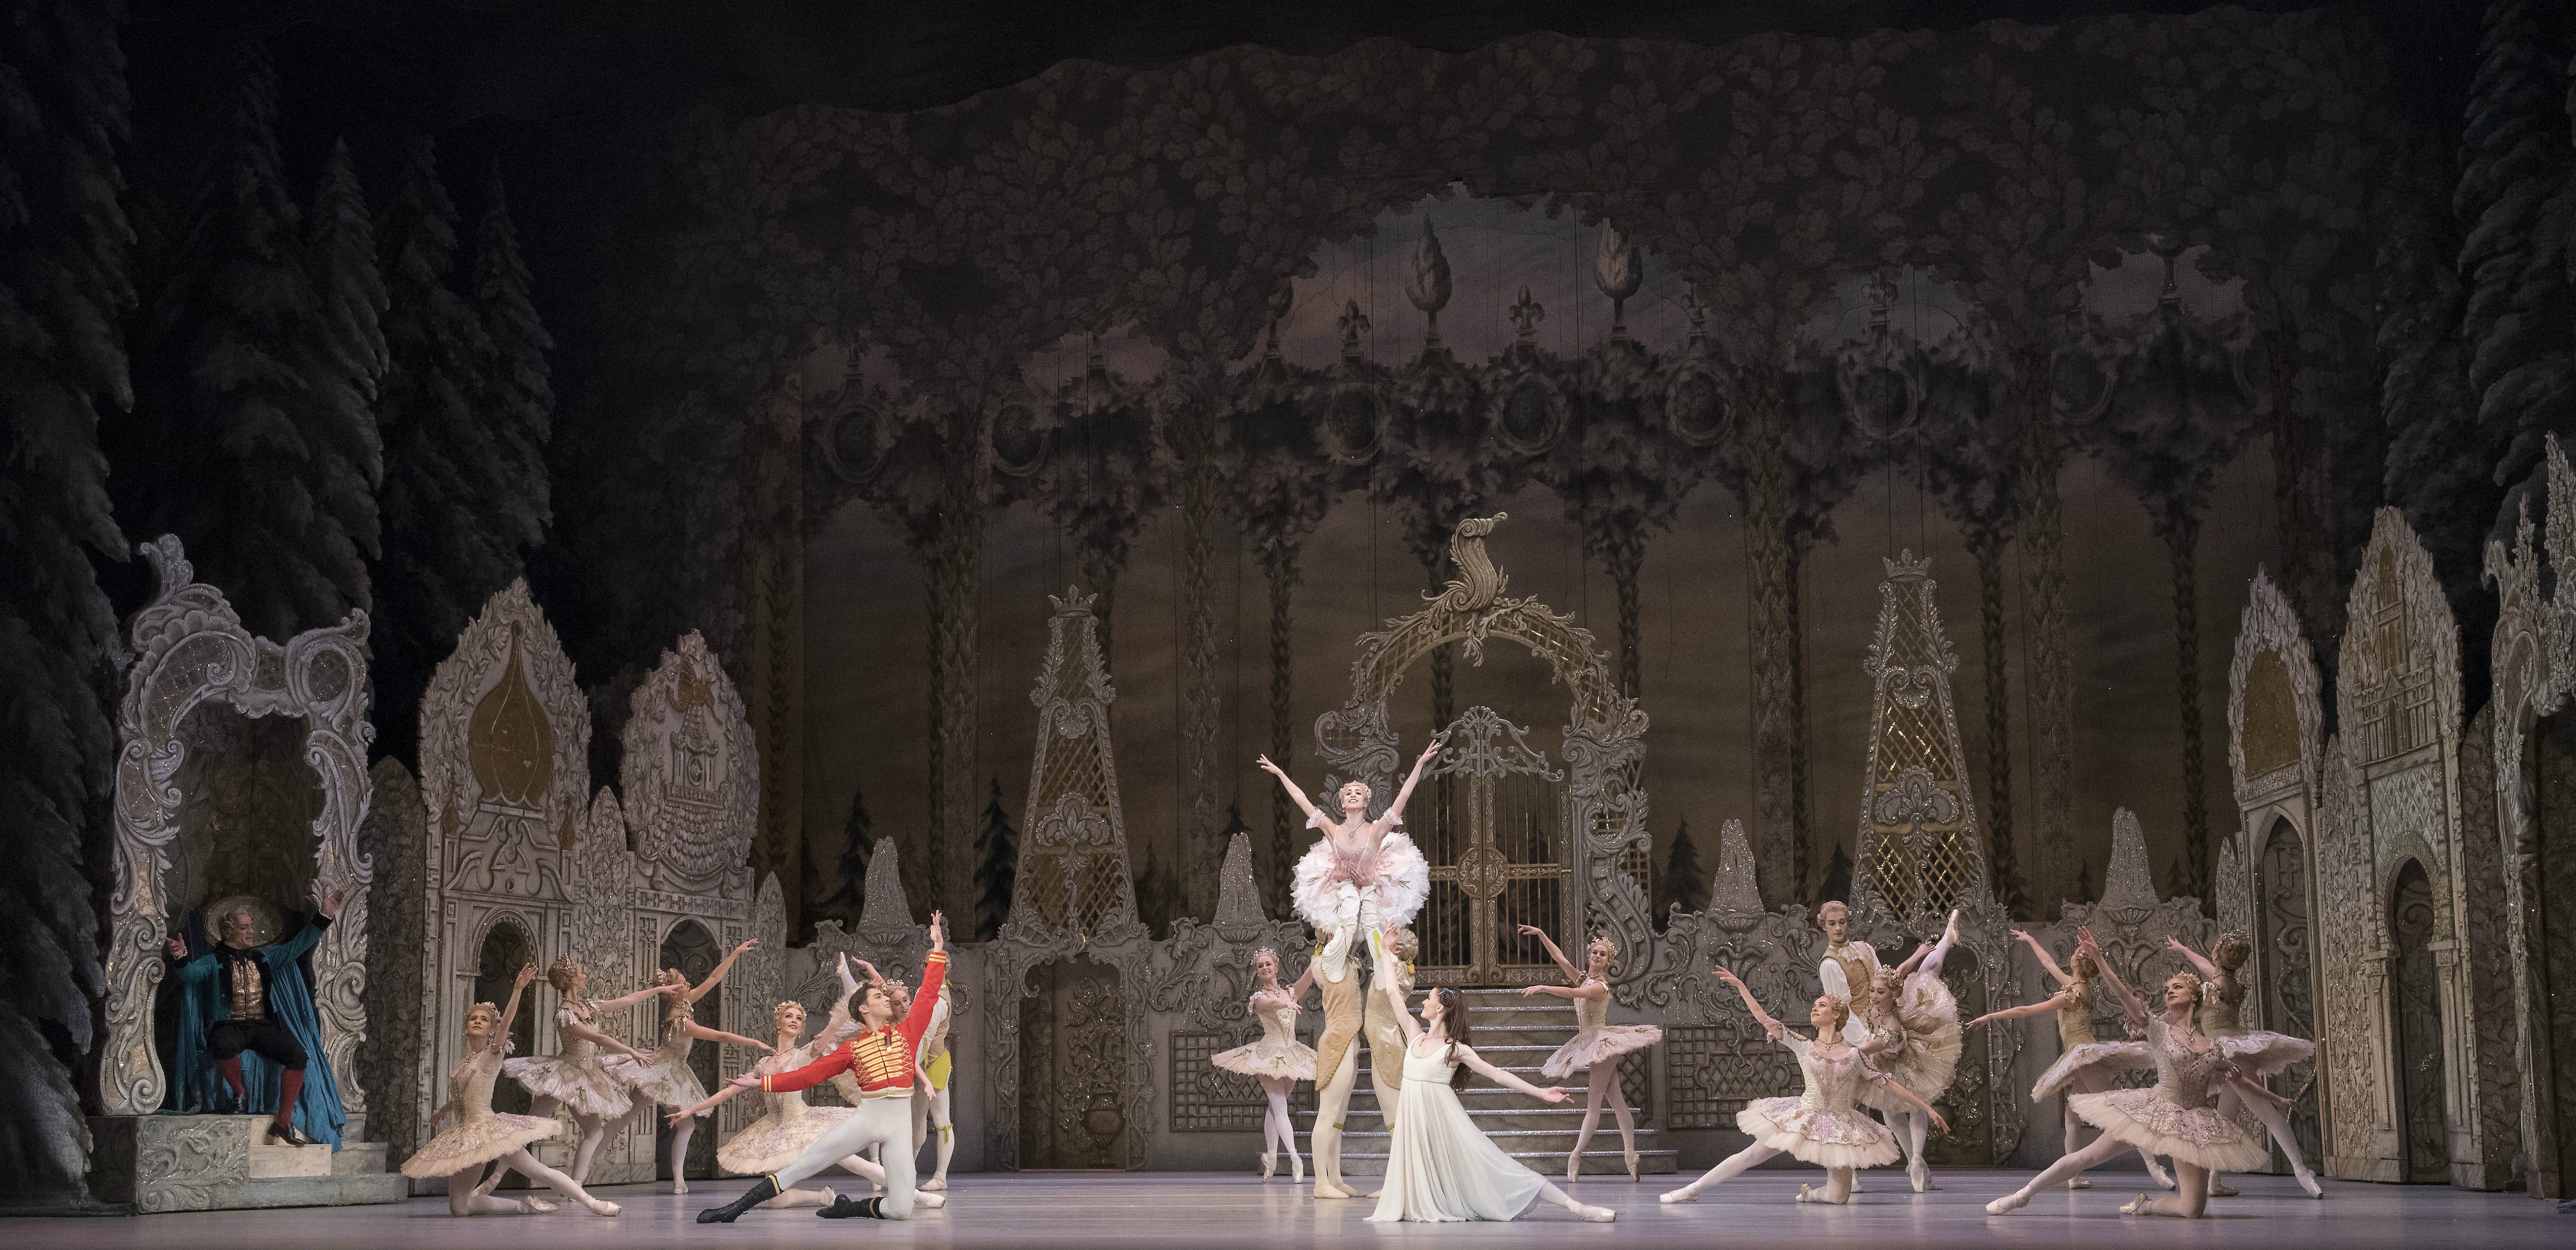 Artists of The Royal Ballet in the Nutcracker. Photo by Alastair Muir/Rex Features